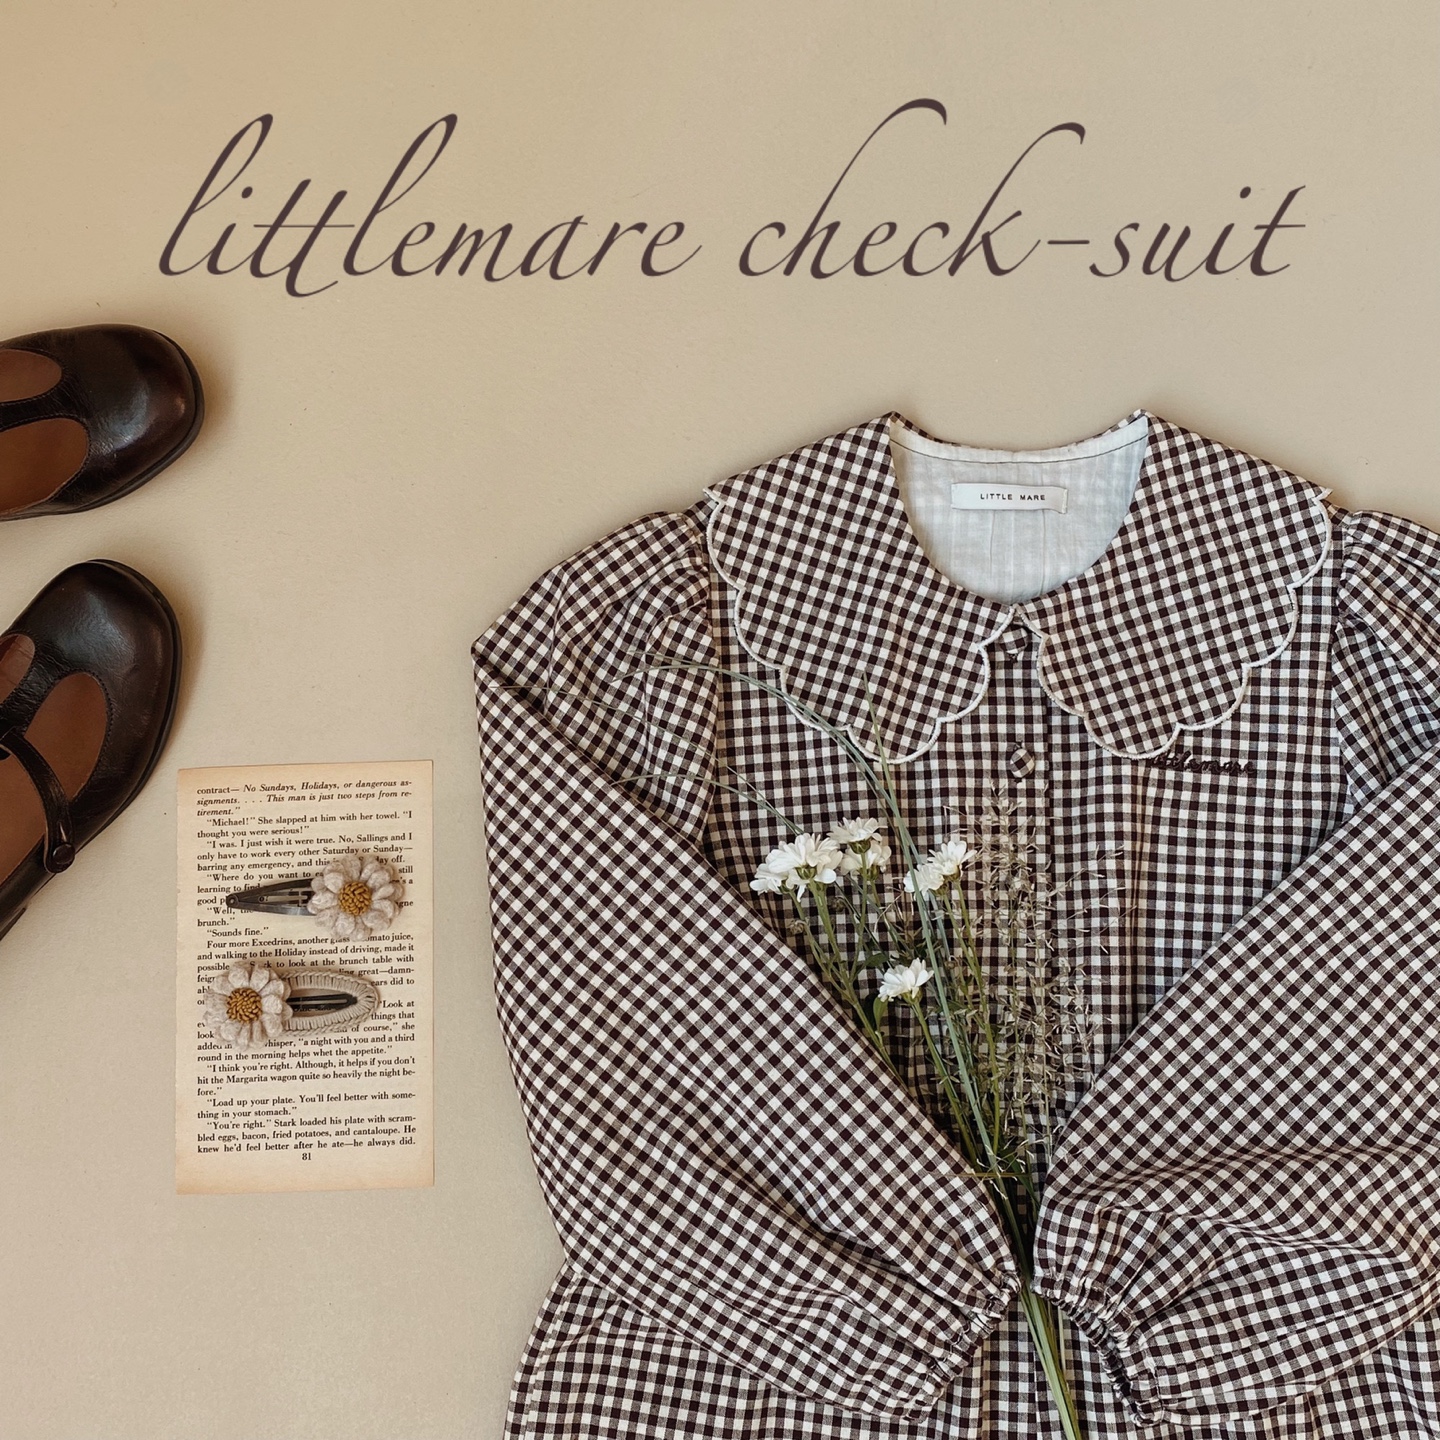 littlemare check suit